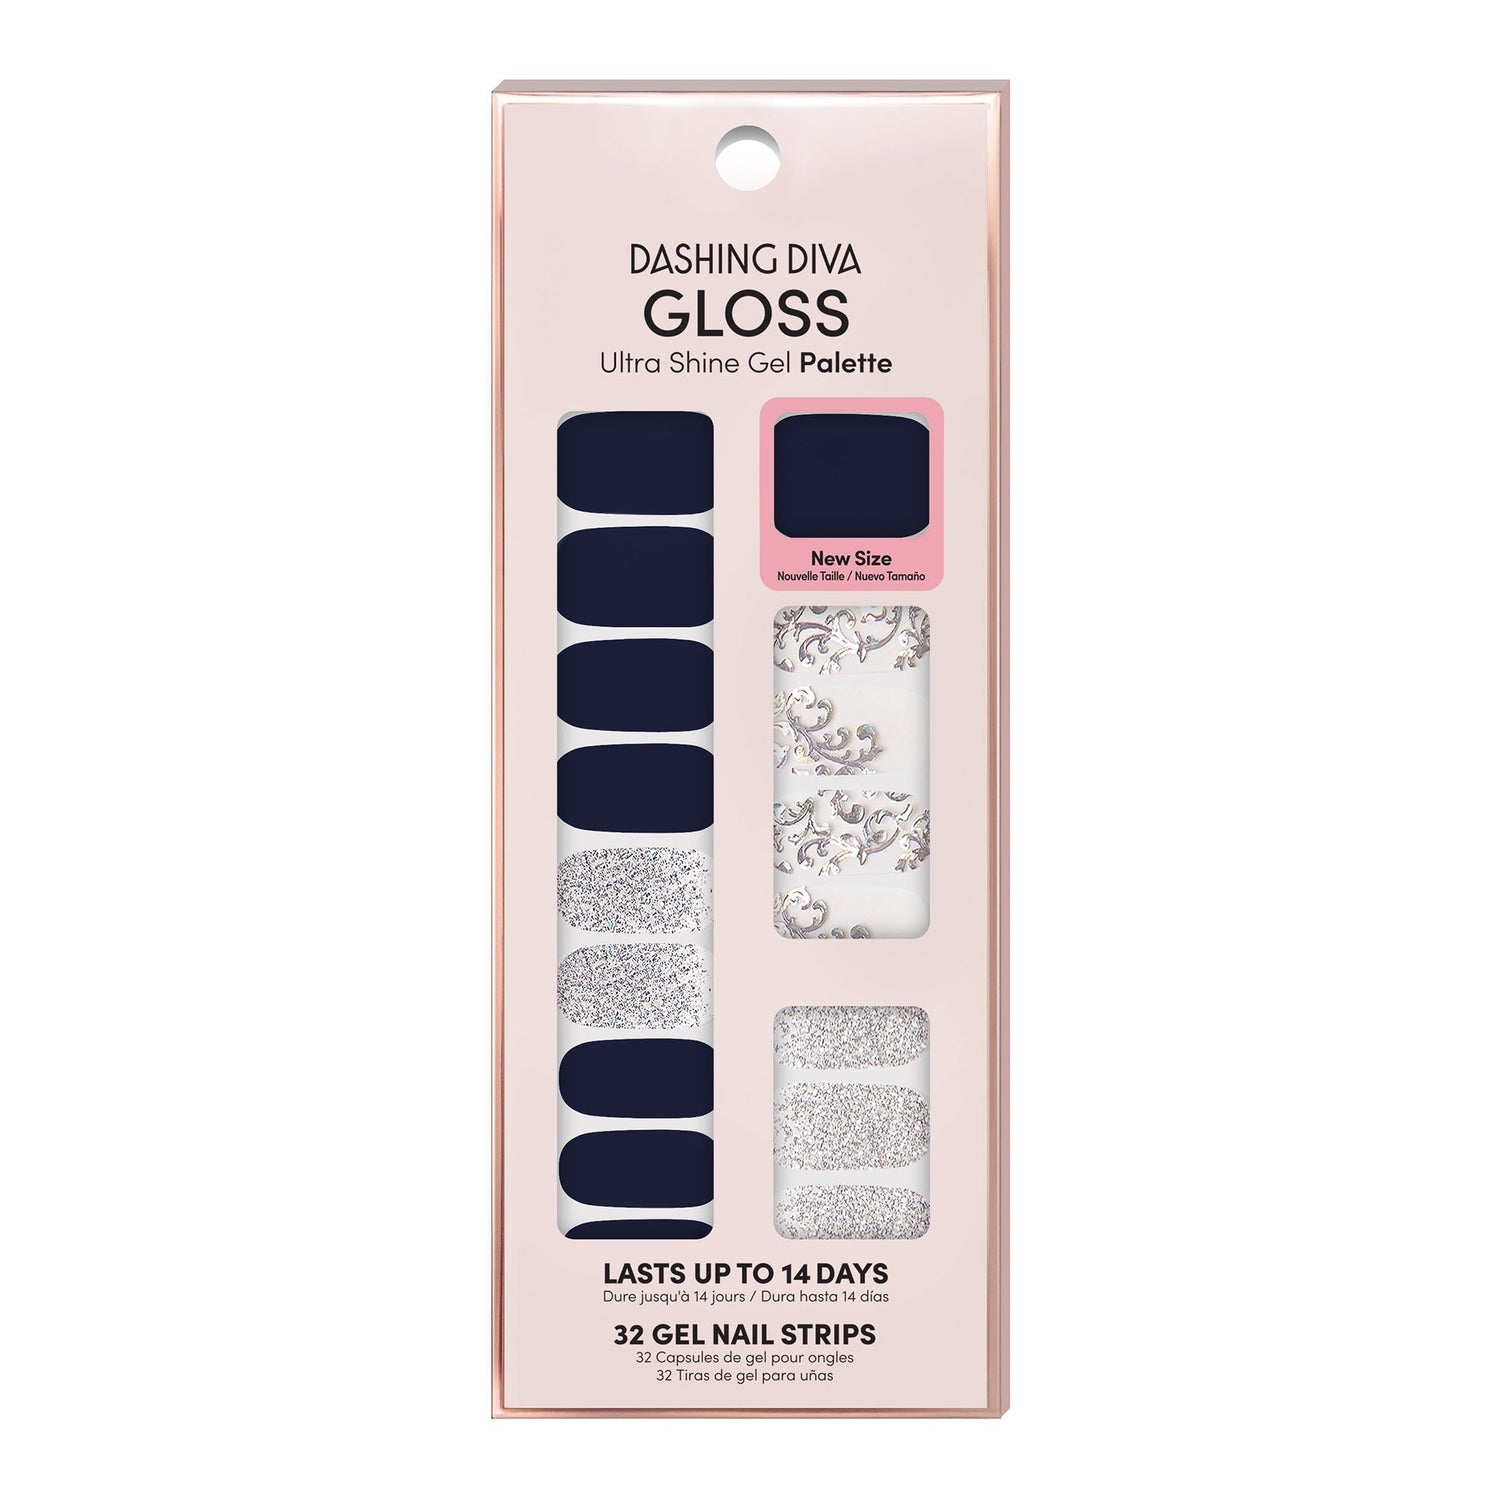 Dashing Diva GLOSS navy blue gel nail strips with silver glitter and demask accents.